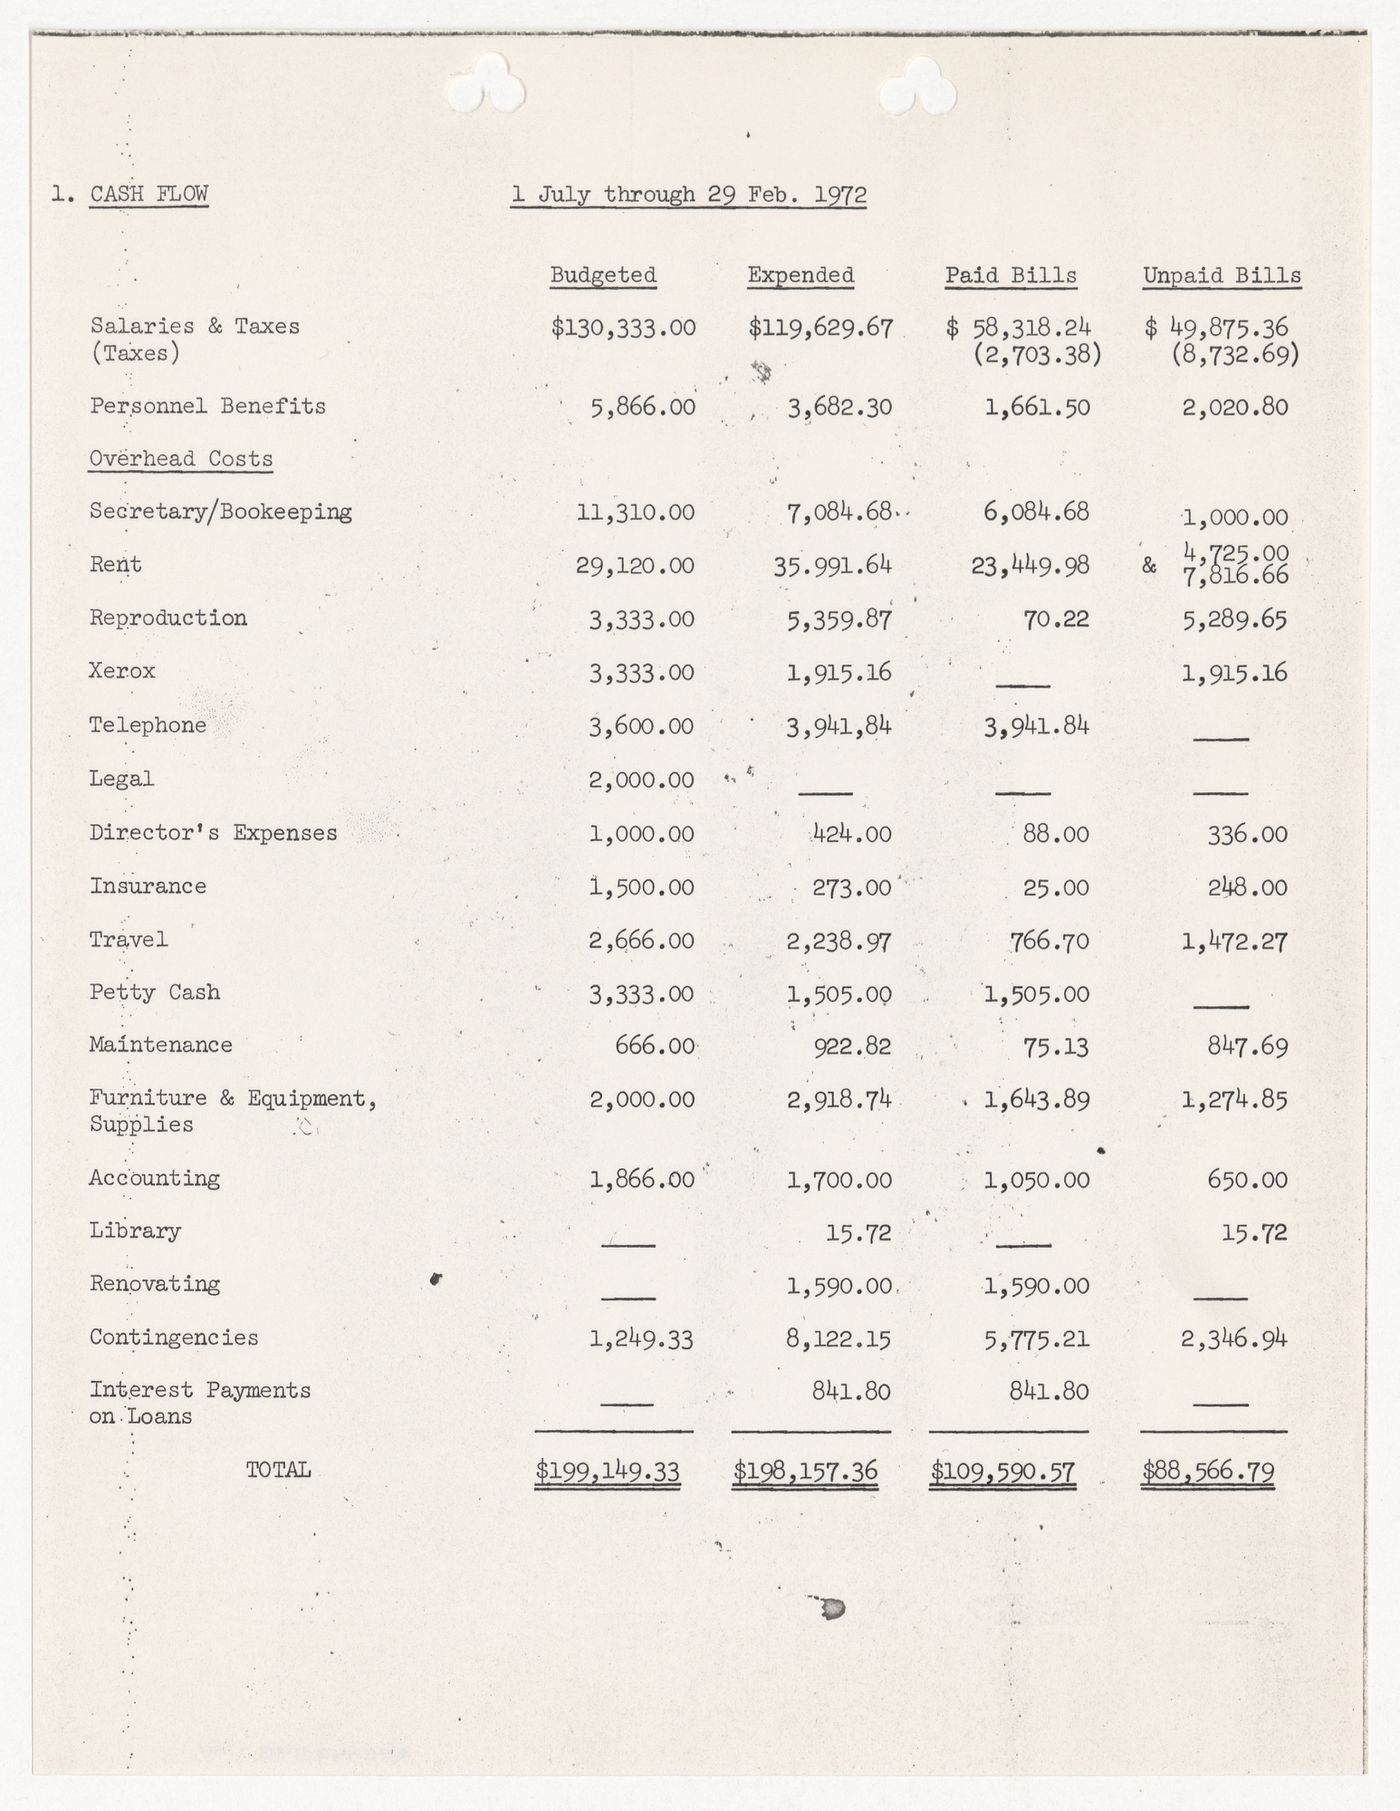 Cash flow and debt analysis from July 1st, 1971 to February 29th, 1972